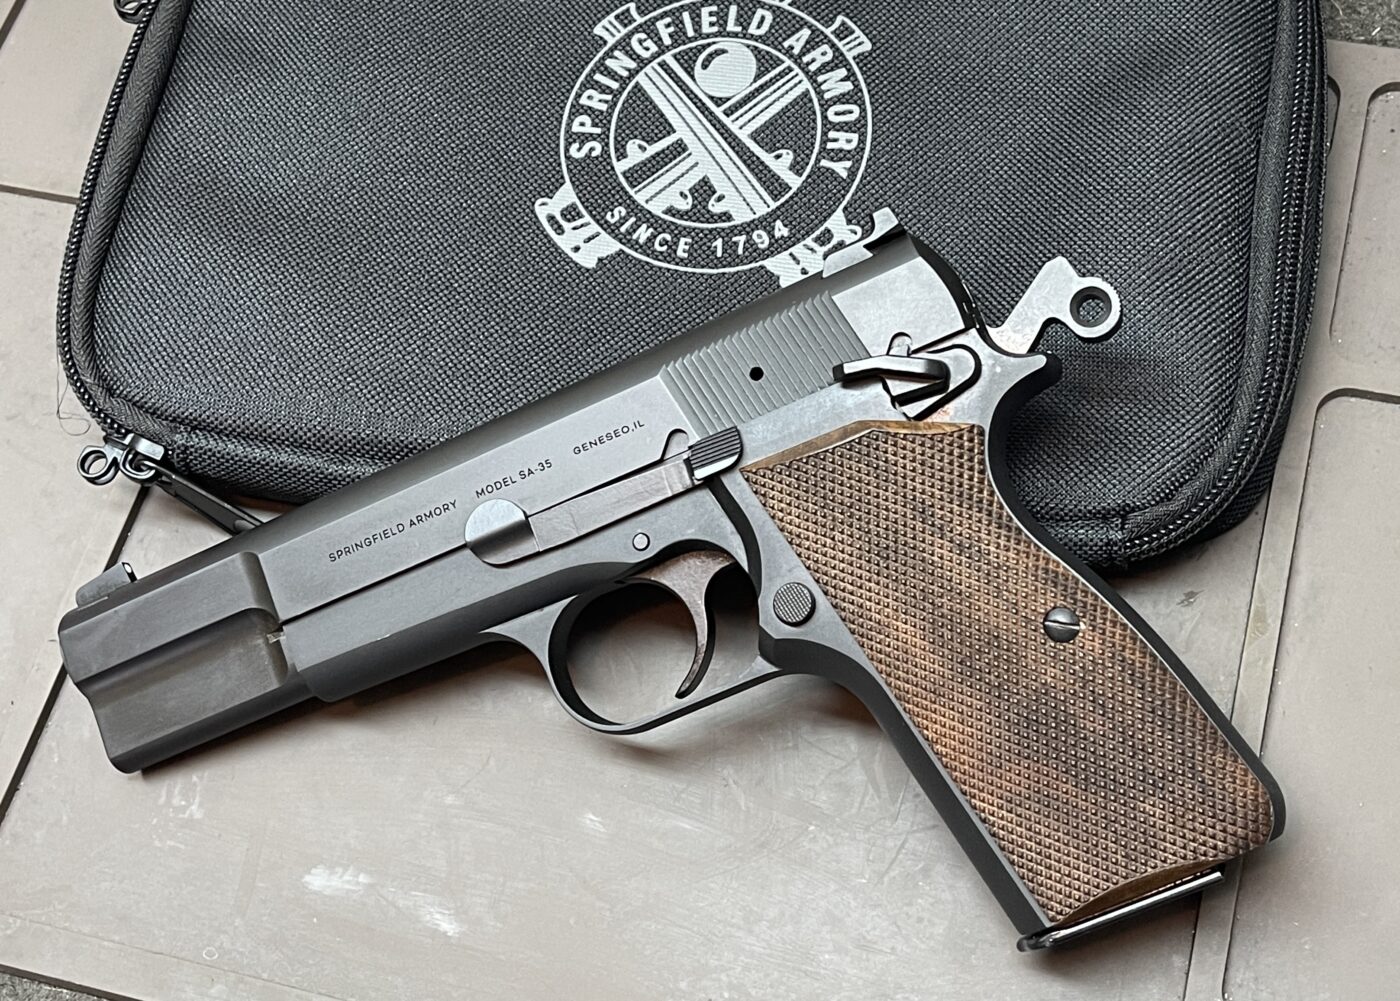 Springfield Armory SA-35 pistol with hammer cocked